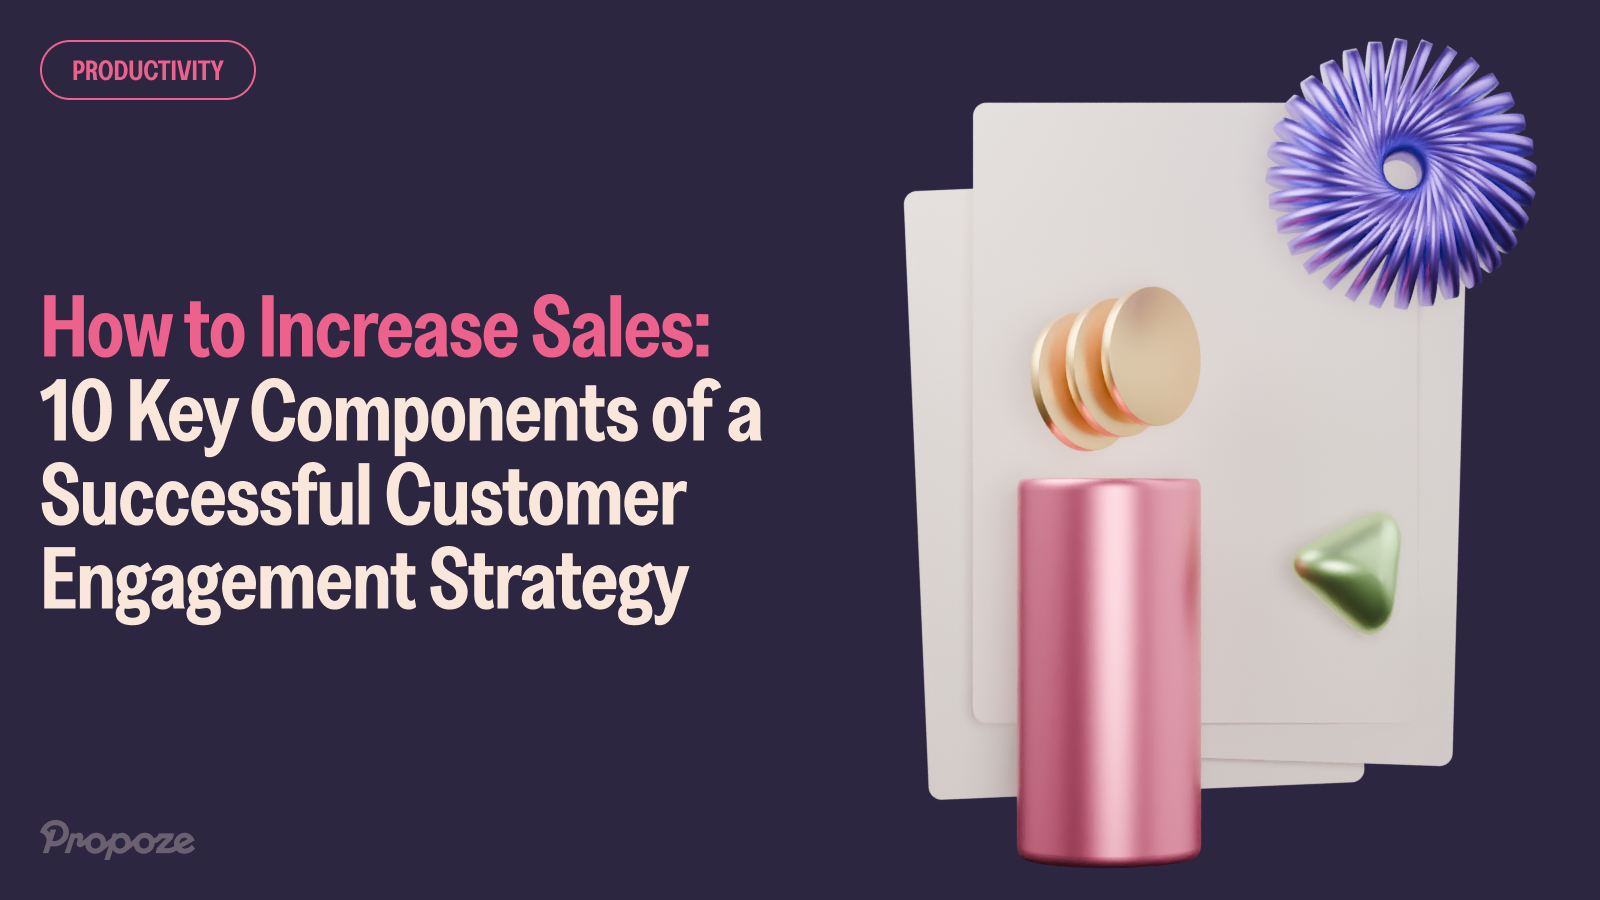 How to Increase Sales for Small Business: 10 Key Components of a Successful Customer Engagement Strategy